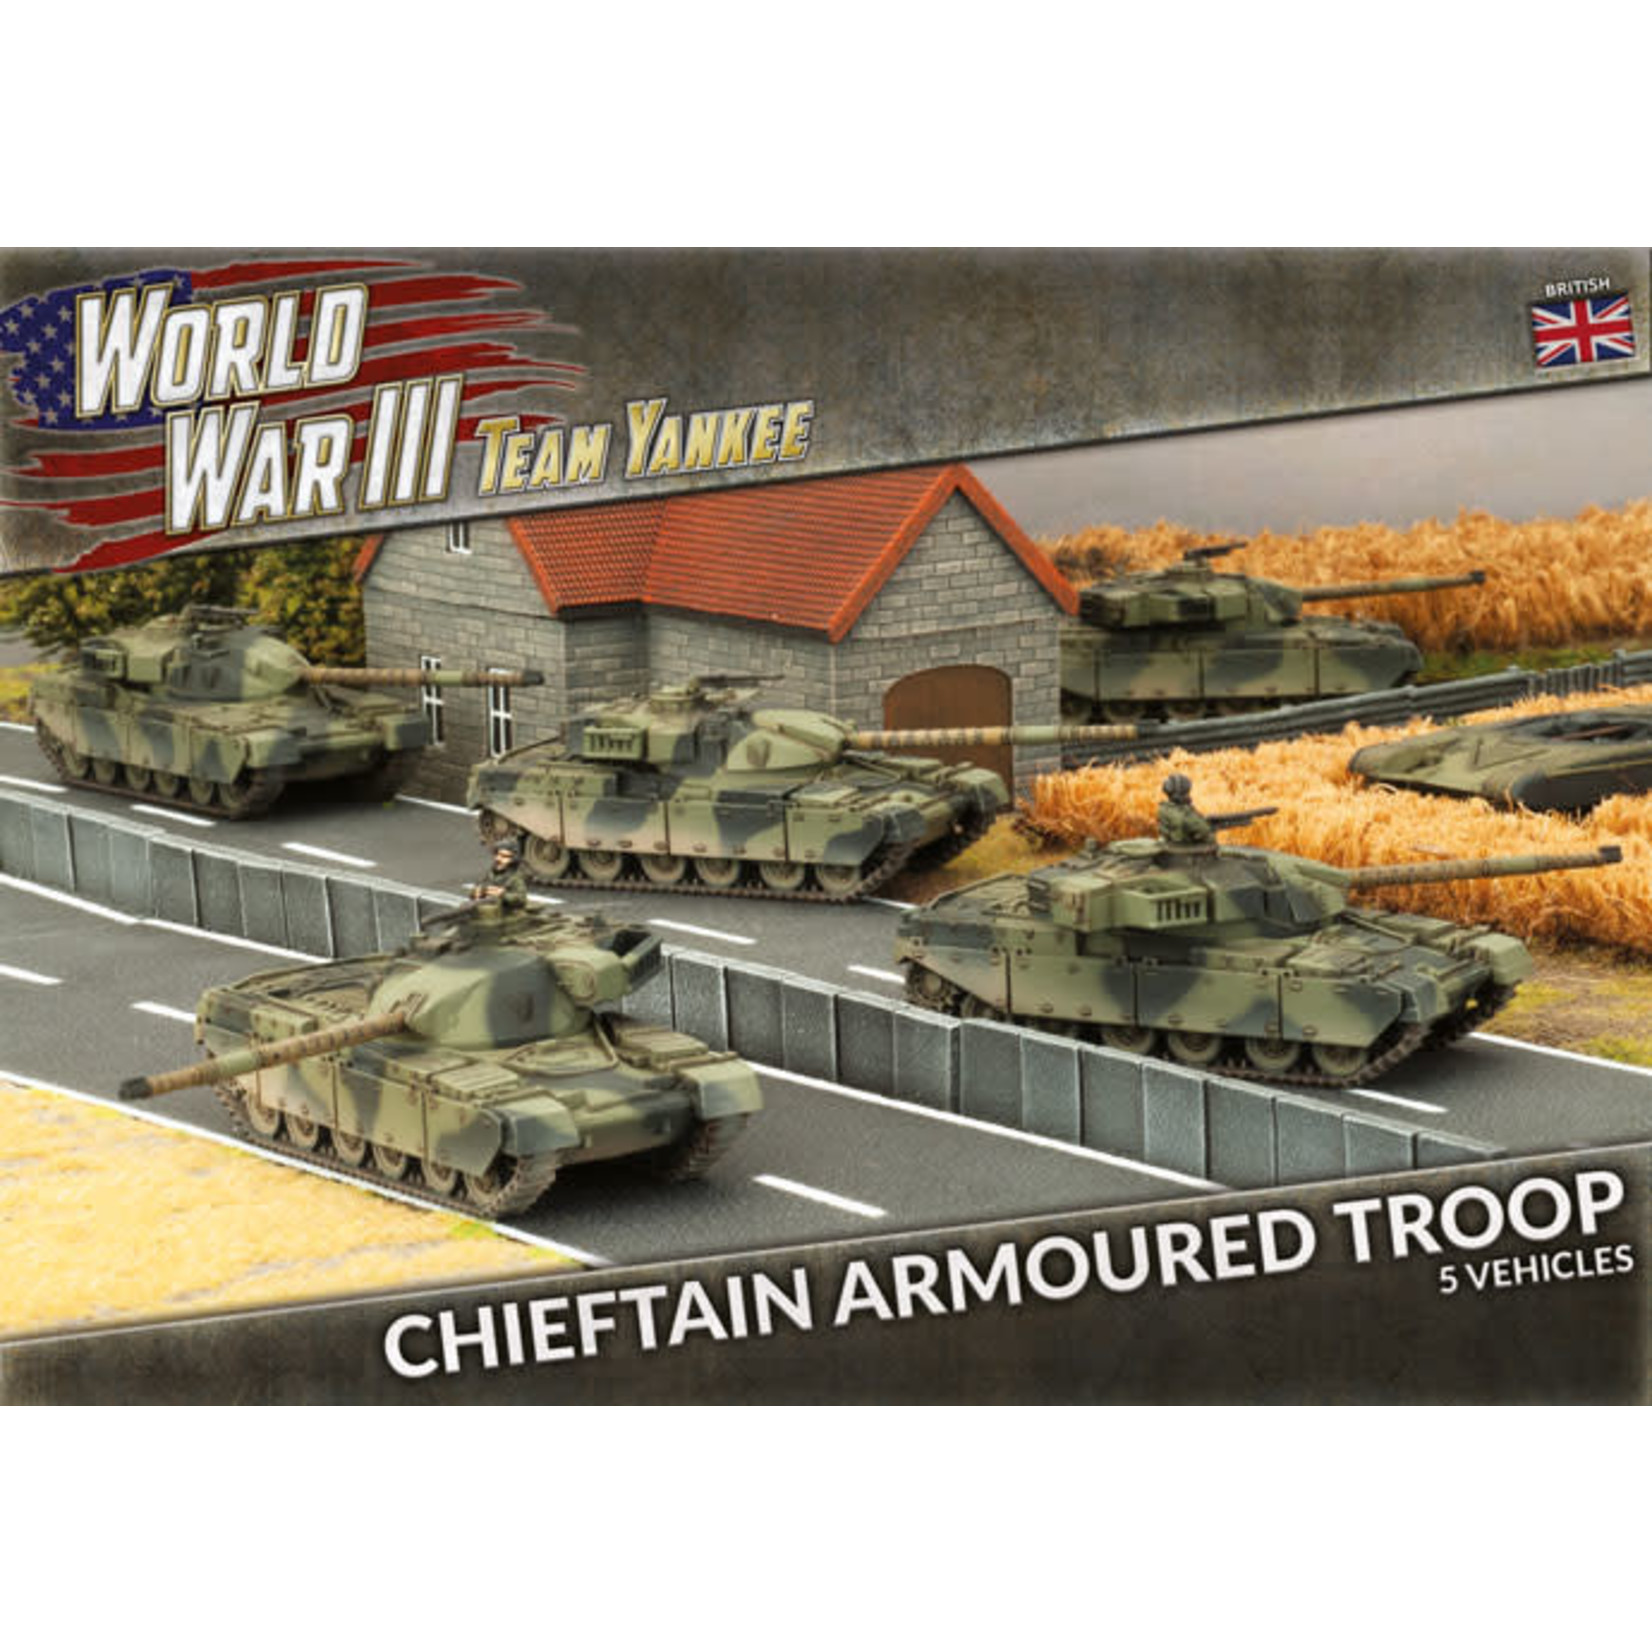 Battlefront Miniatures Chieftain Armoured Troup (British)